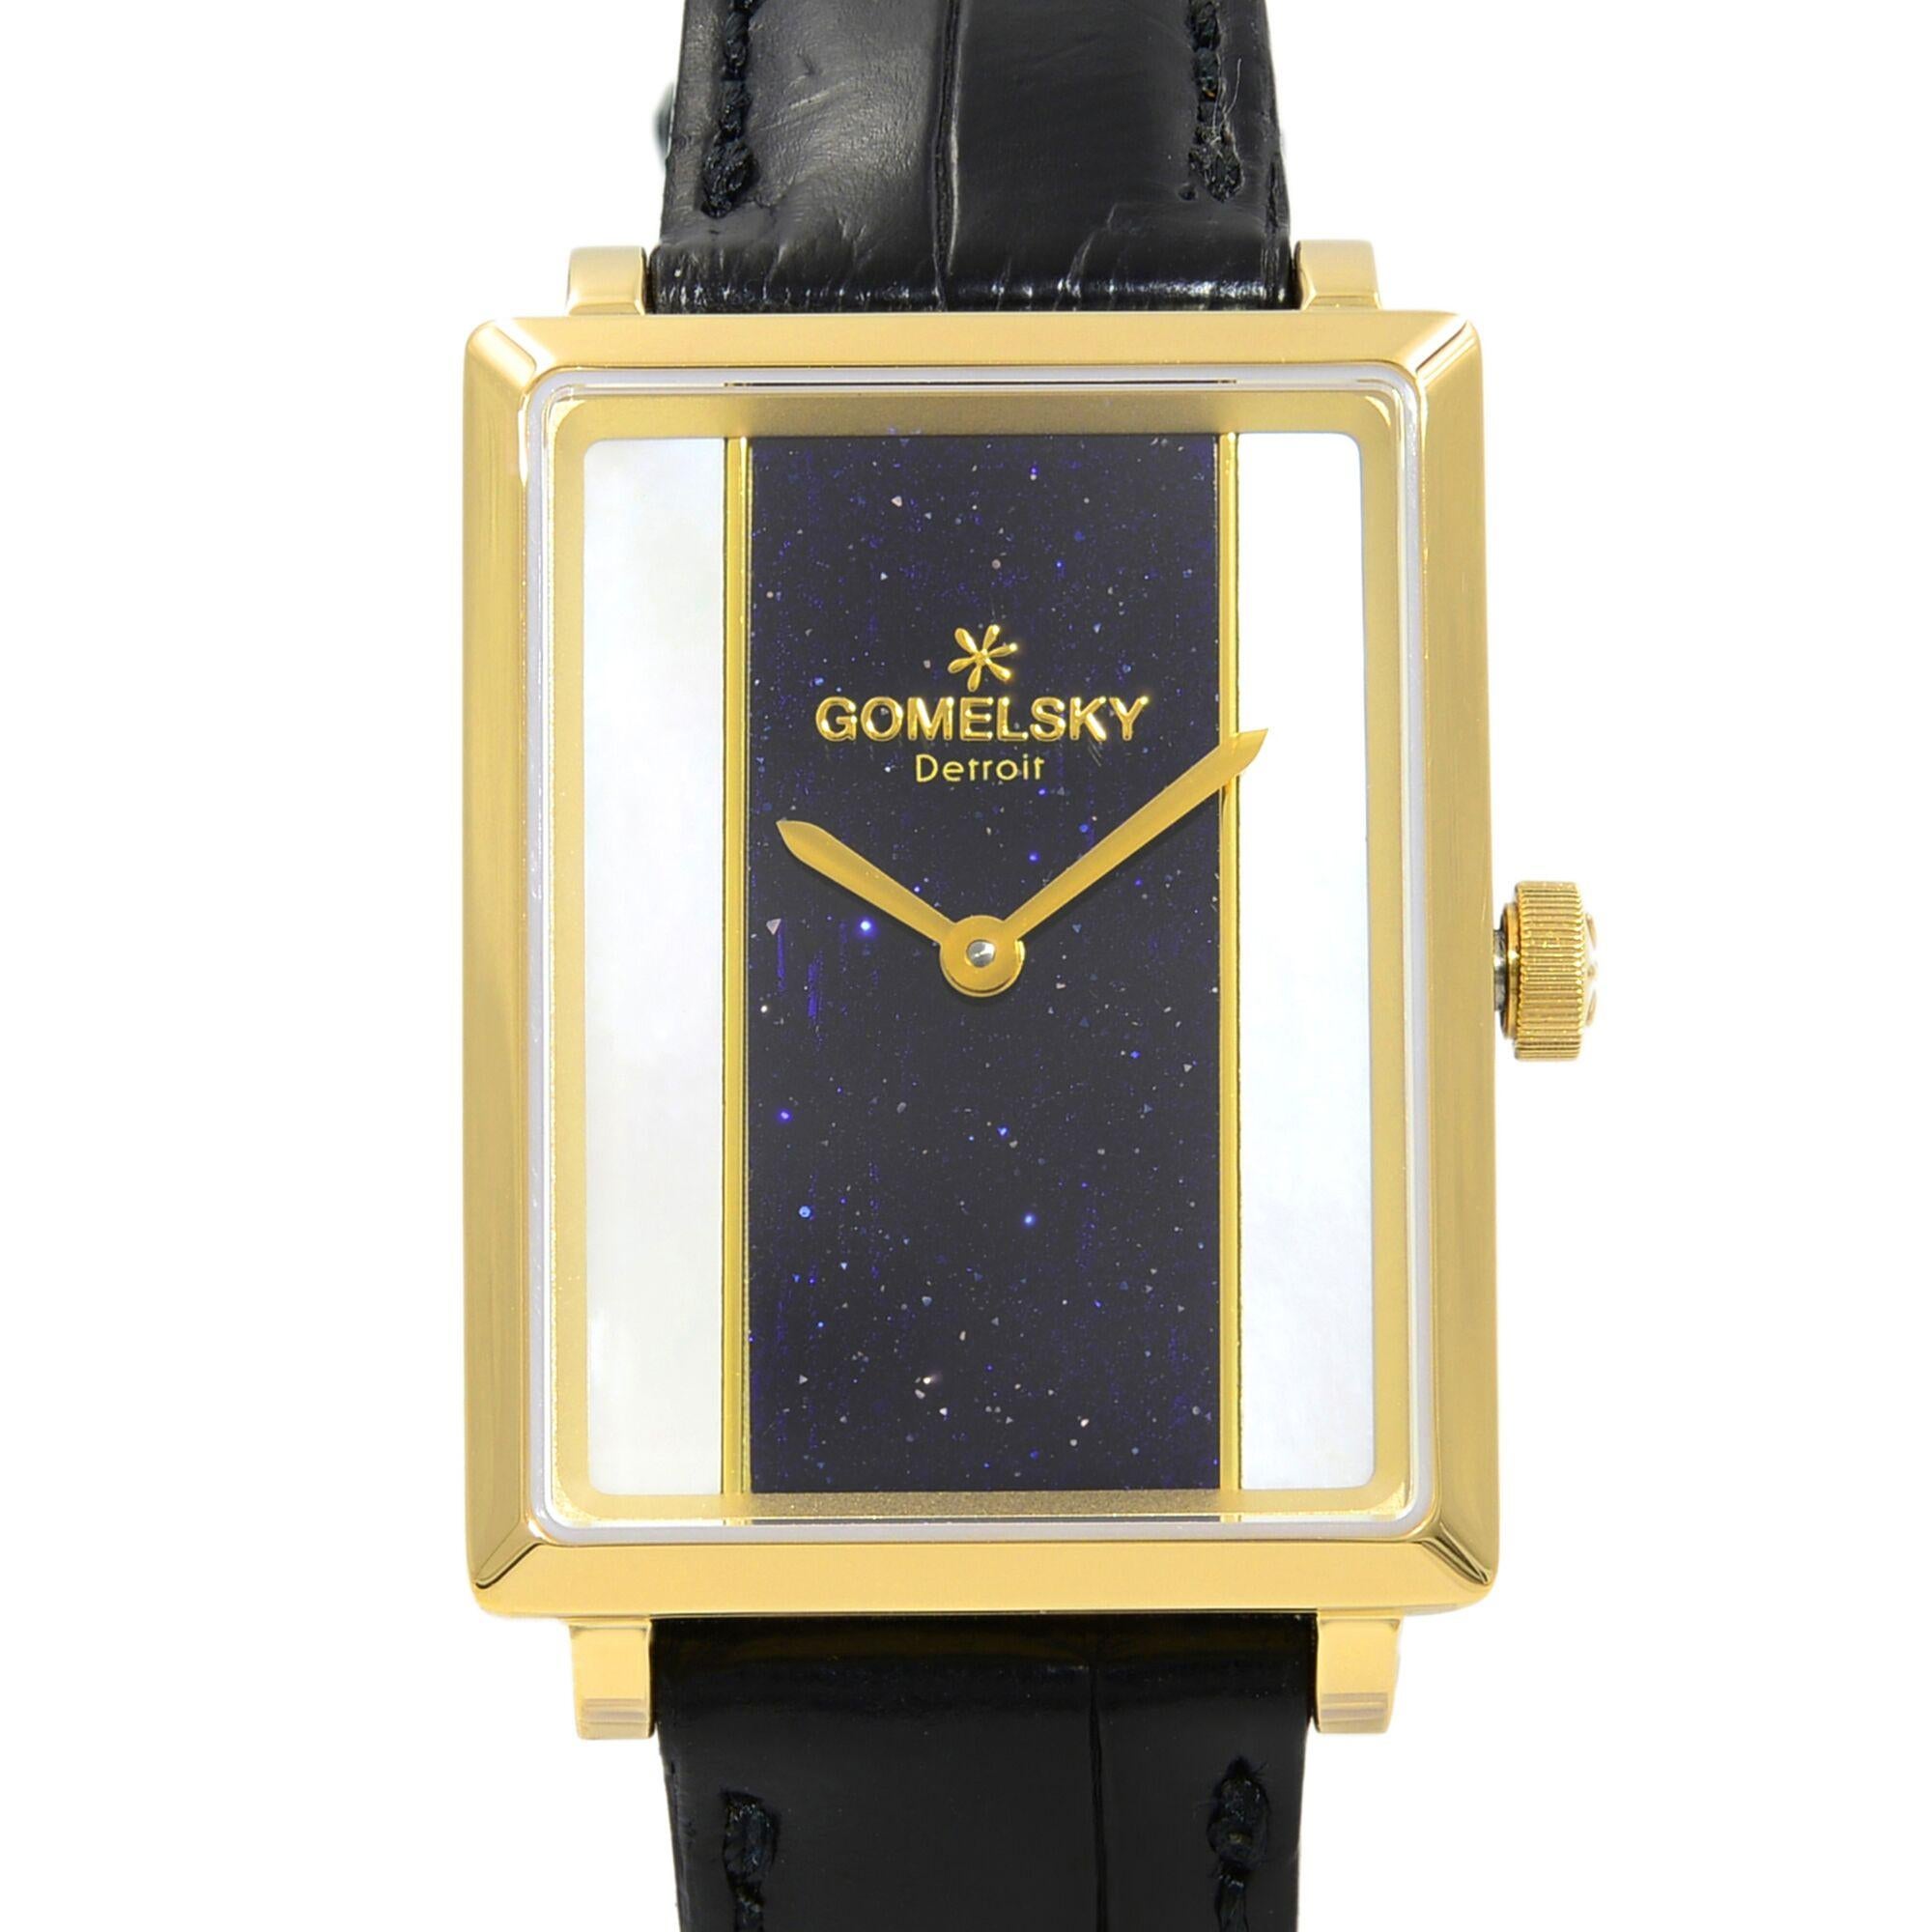 This brand new Gomelsky Shirley Fromer G0120083081 is a beautiful Unisex timepiece that is powered by quartz (battery) movement which is cased in a stainless steel case. It has a rectangle shape face, dial, and has hand unspecified style markers. It